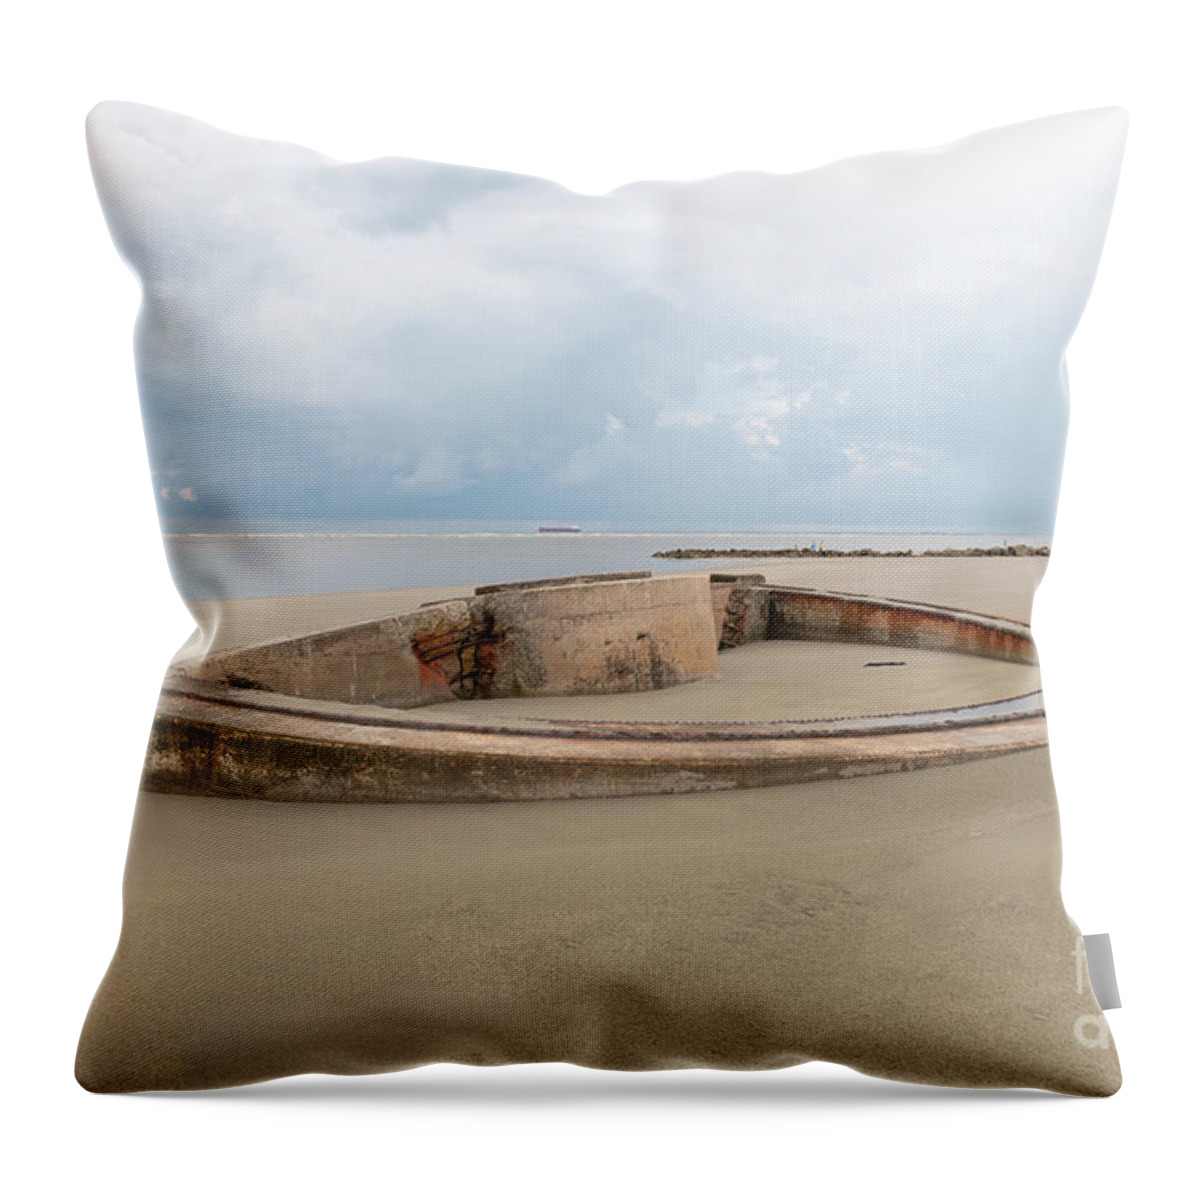 Historic Military Apparatus Throw Pillow featuring the photograph Sullivan's Island Coastal Defense - Panama Mount by Dale Powell